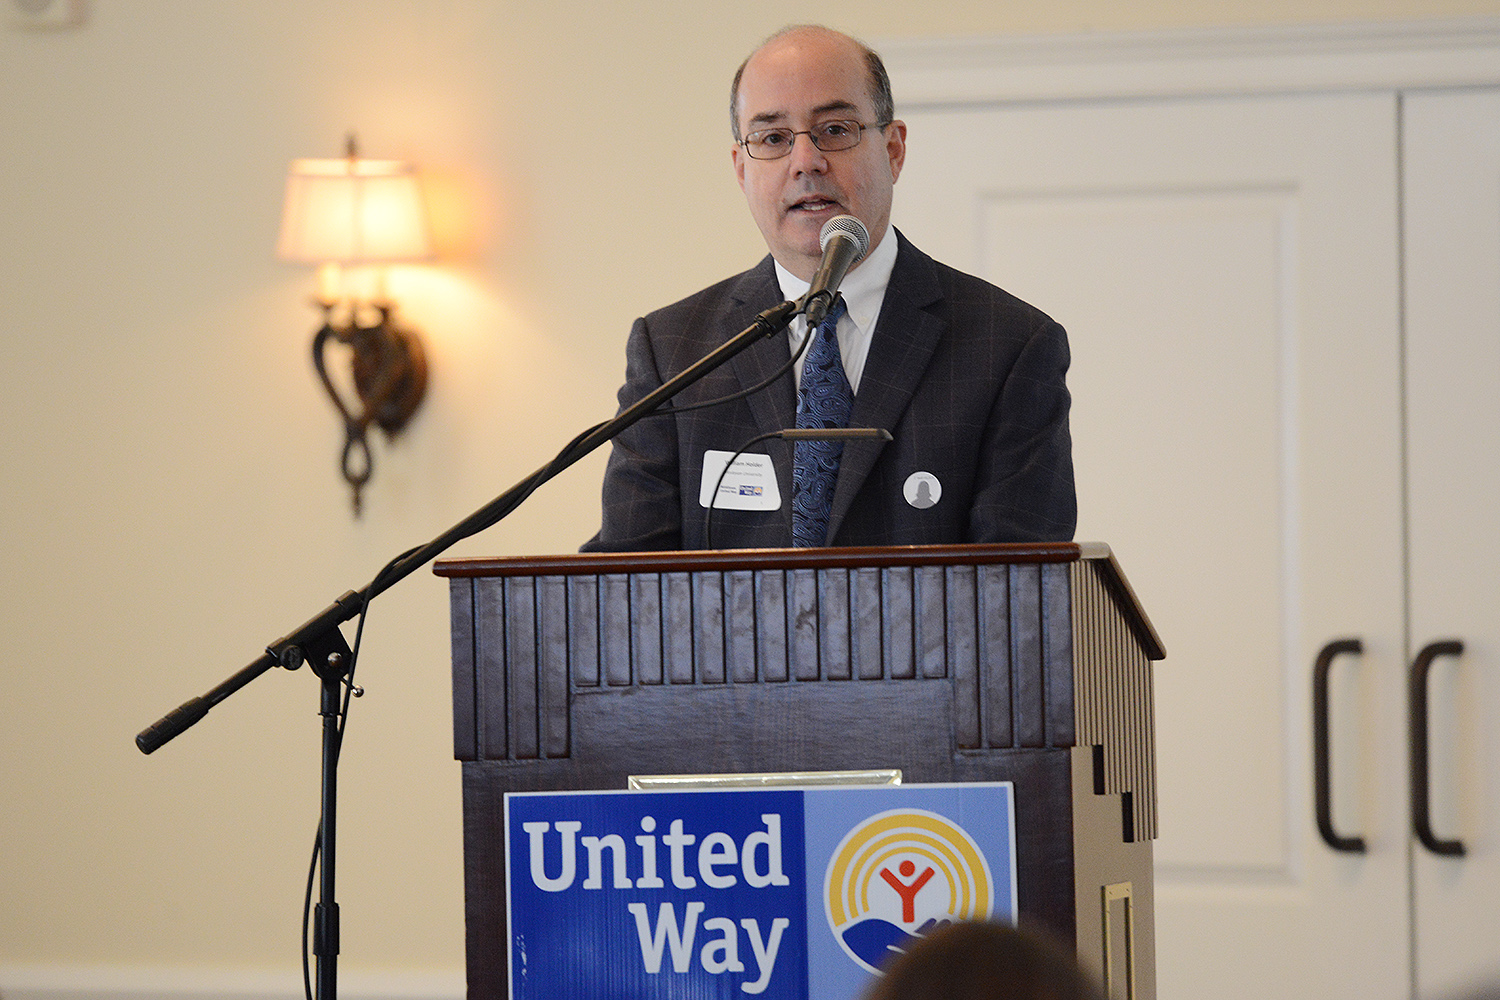 Bill Holder, director of university communications and president of the Middlesex United Way, led the annual meeting at the Riverhouse at Goodspeed Station in Haddam, Conn. Wesleyan has a long history of employees giving to the United Way. Since 2001, employees have donated $1.7 million to the cause.